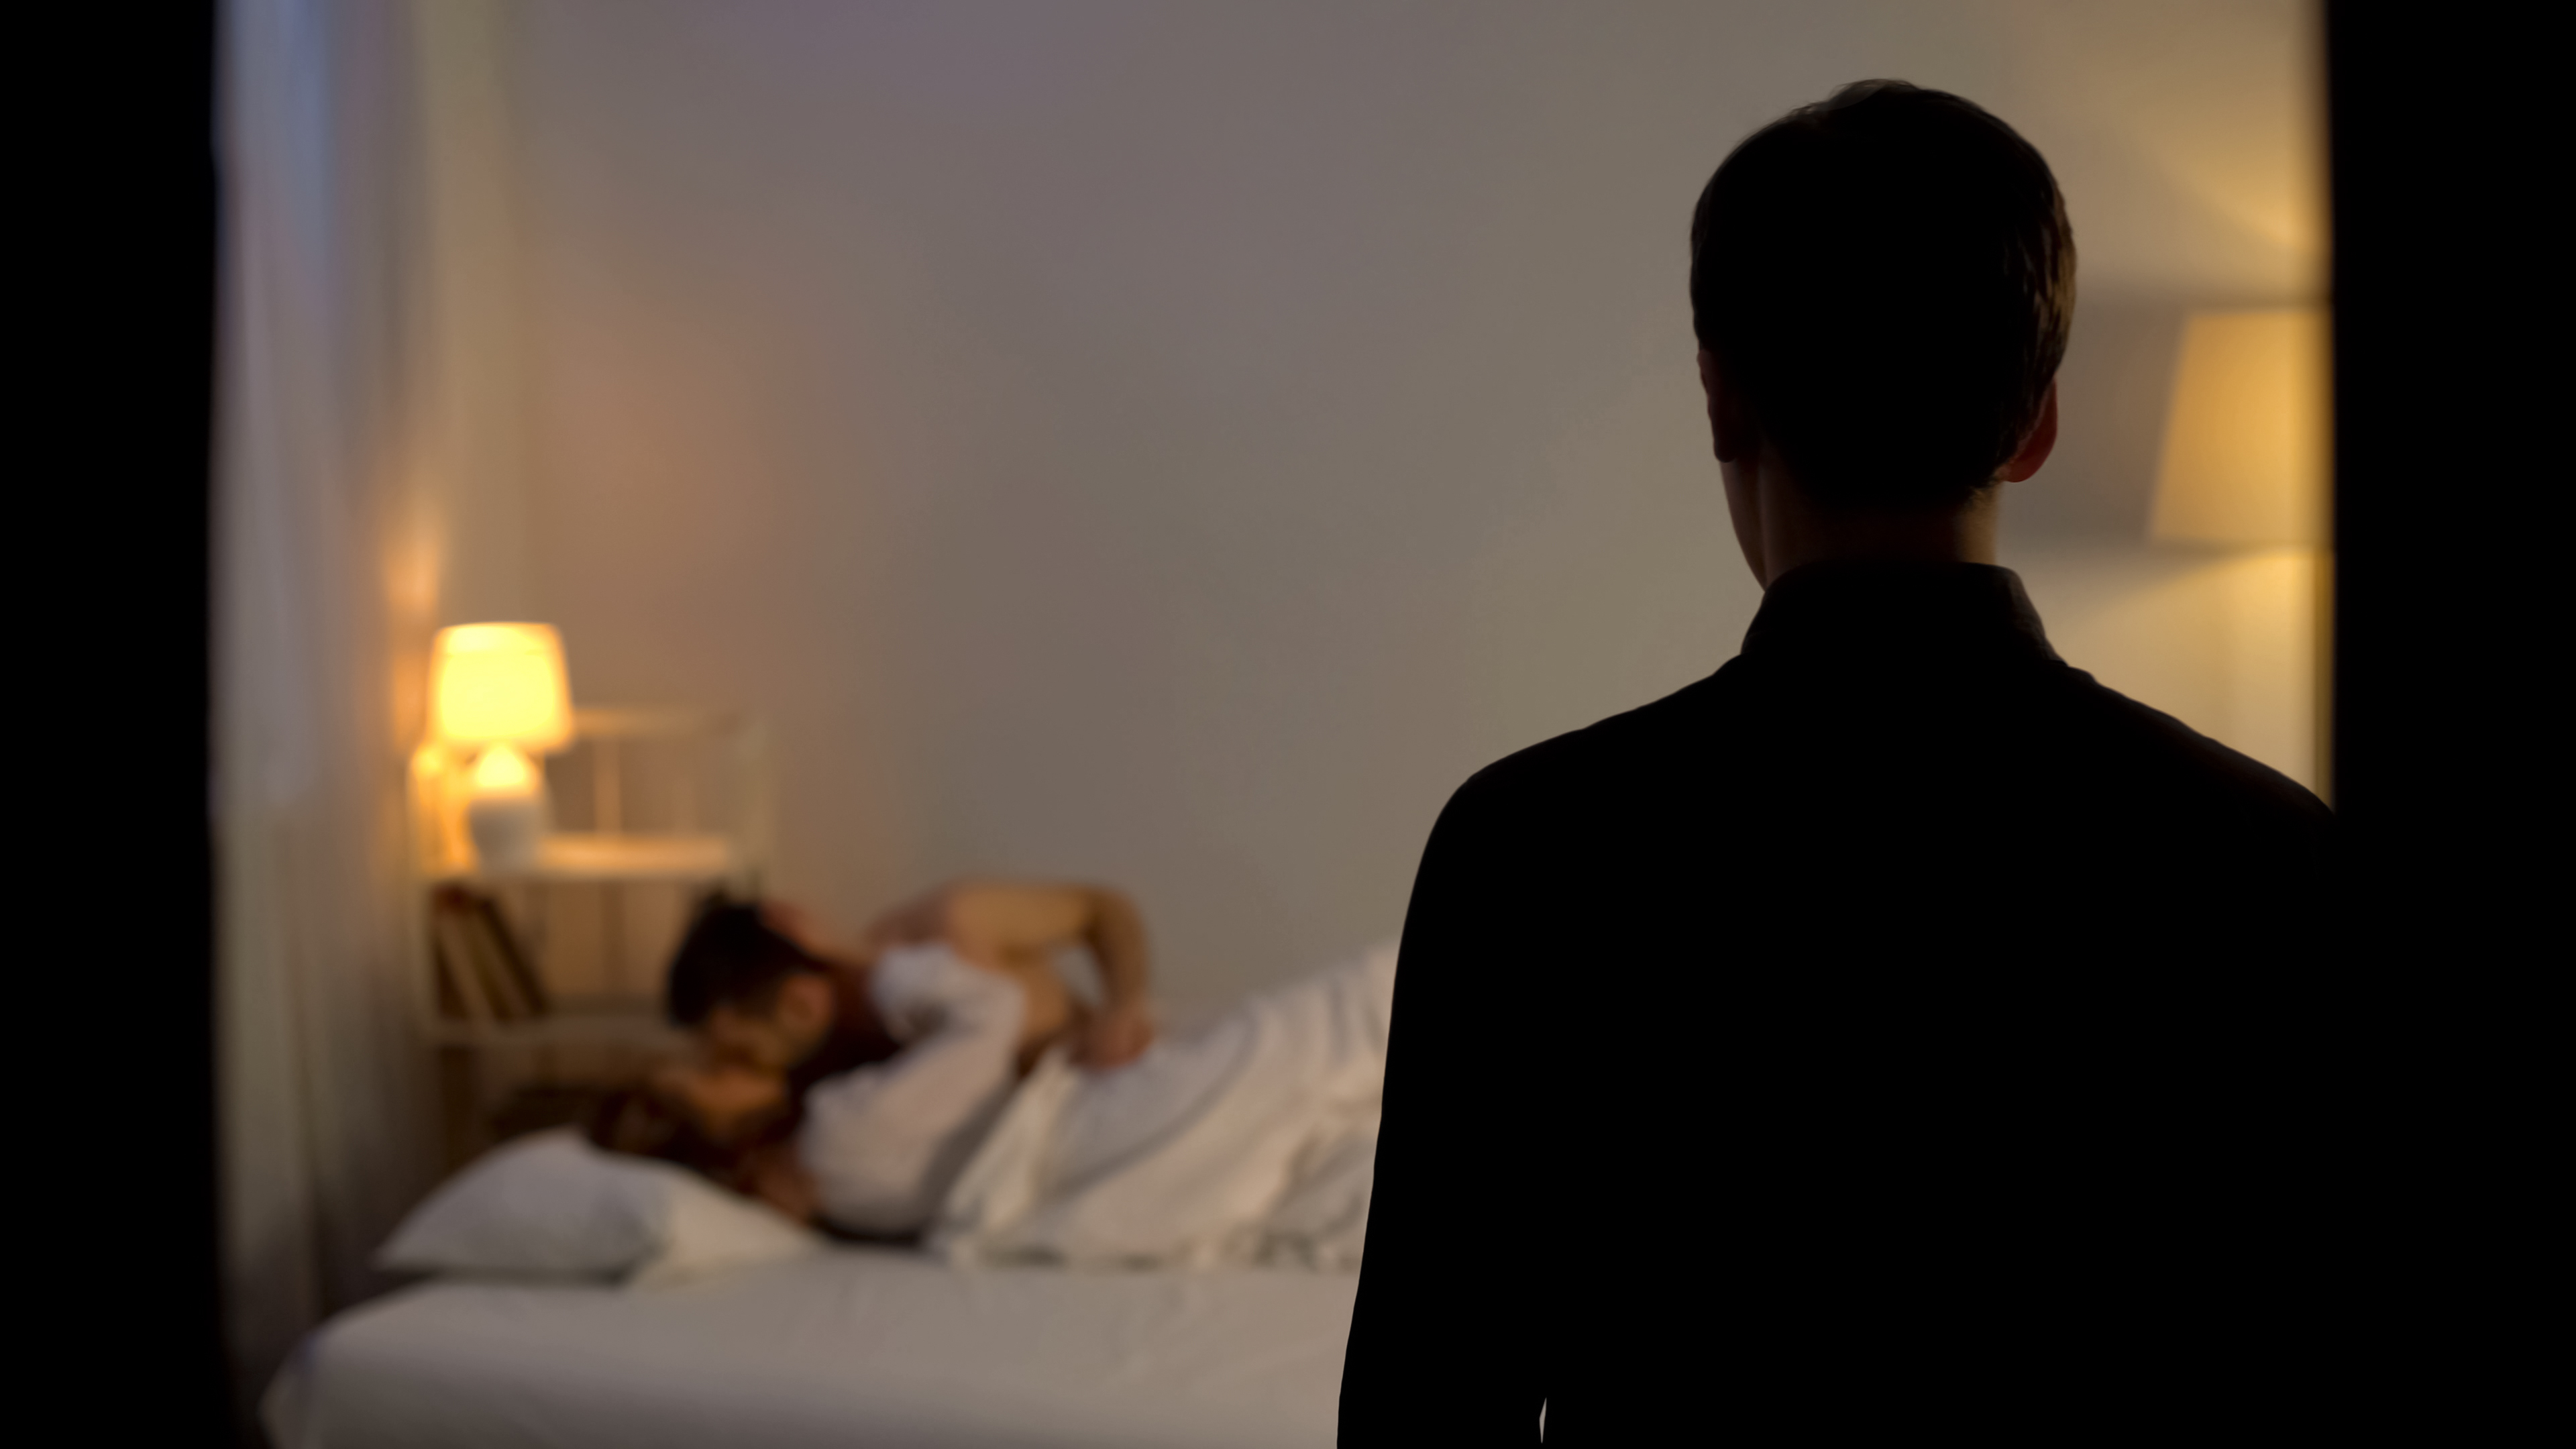 A husband stands in shock after catching his wife cheating with a lover in bed | Source: Shutterstock